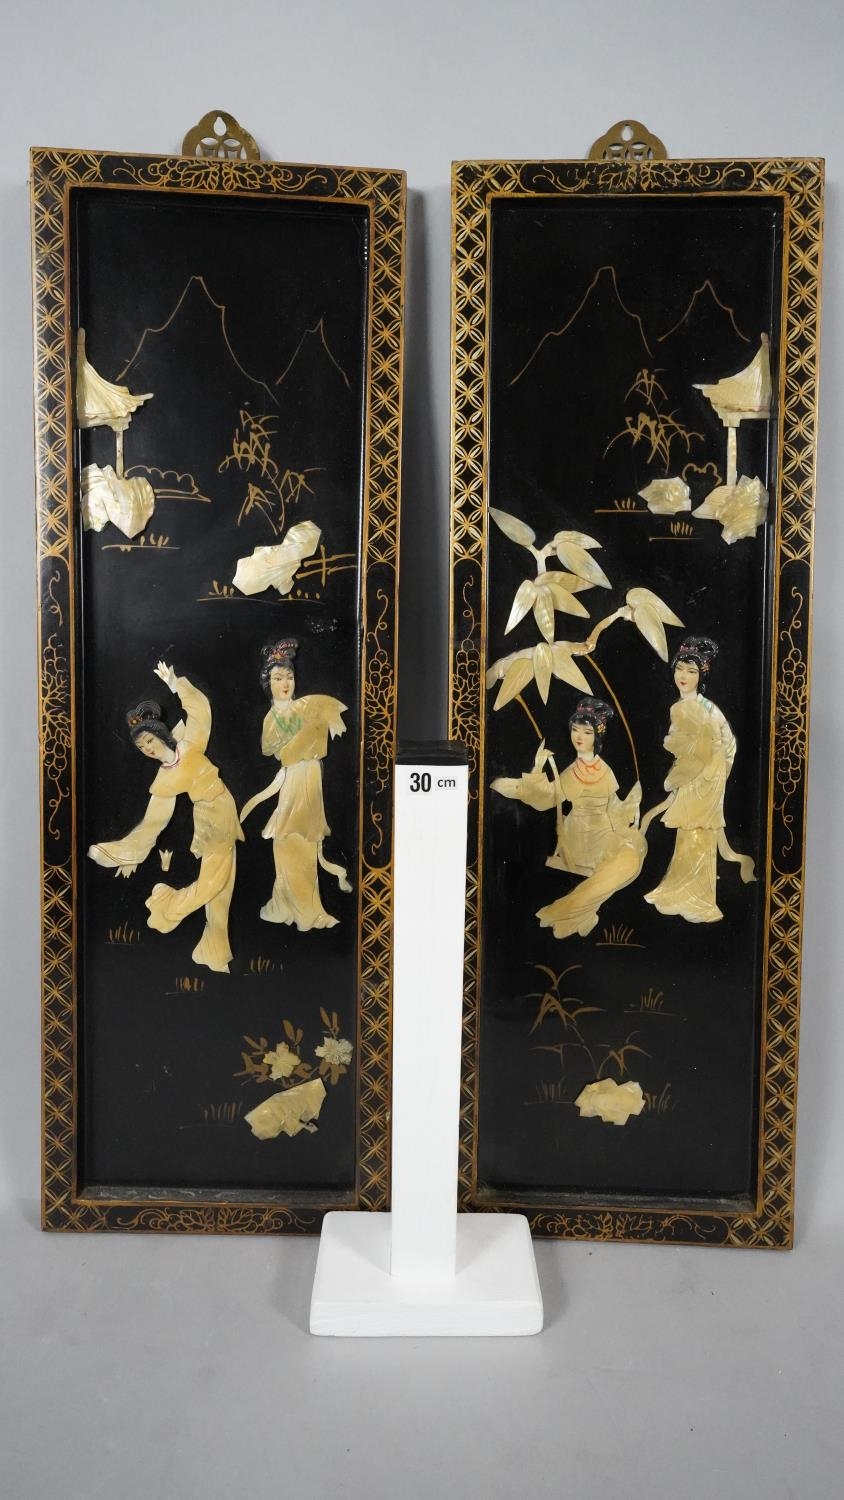 Two vintage Japanese lacquered wooden plaques with gilded borders, mounted with bone and mother of - Image 8 of 8